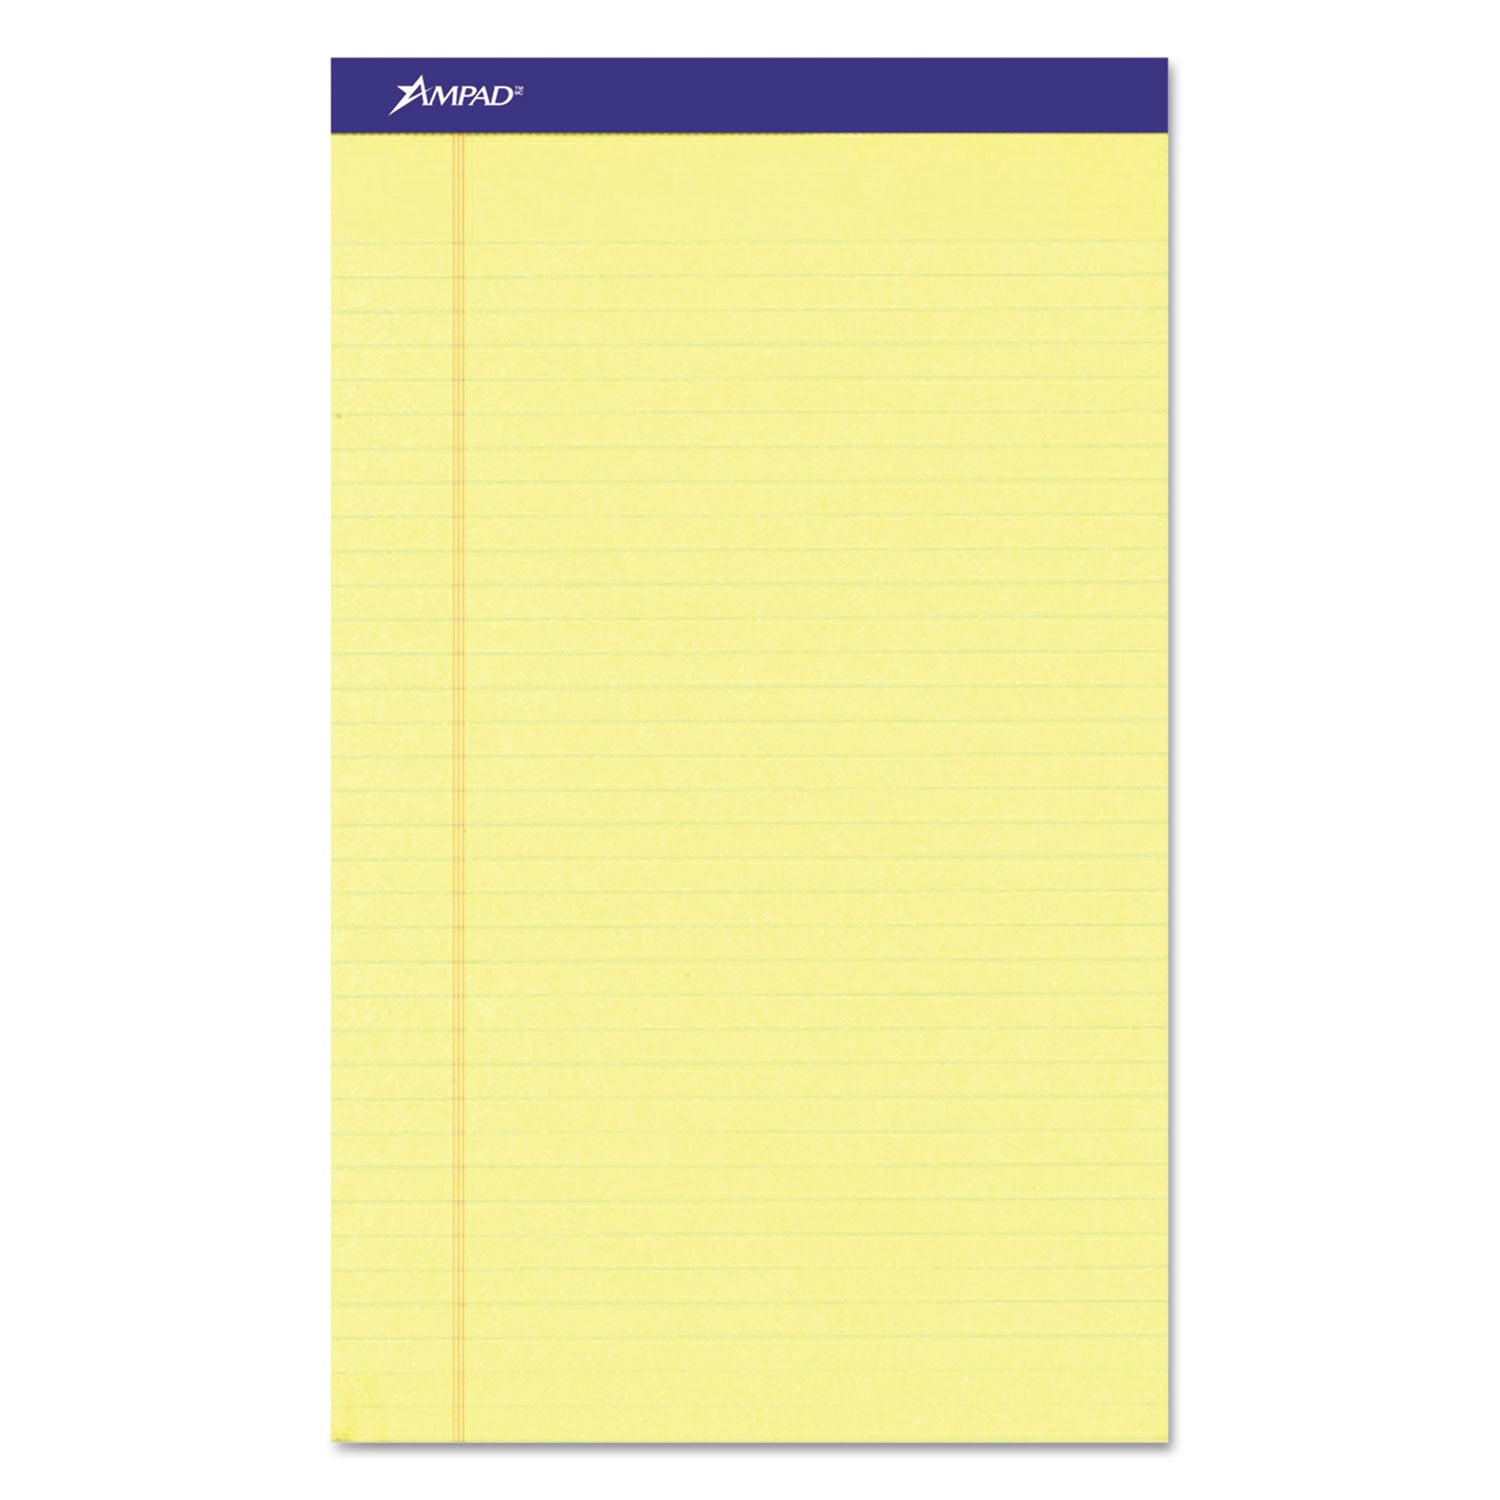 Perforated Writing Pads, Wide/Legal Rule, 50 Canary-Yellow 8.5 x 14 Sheets, Dozen - 